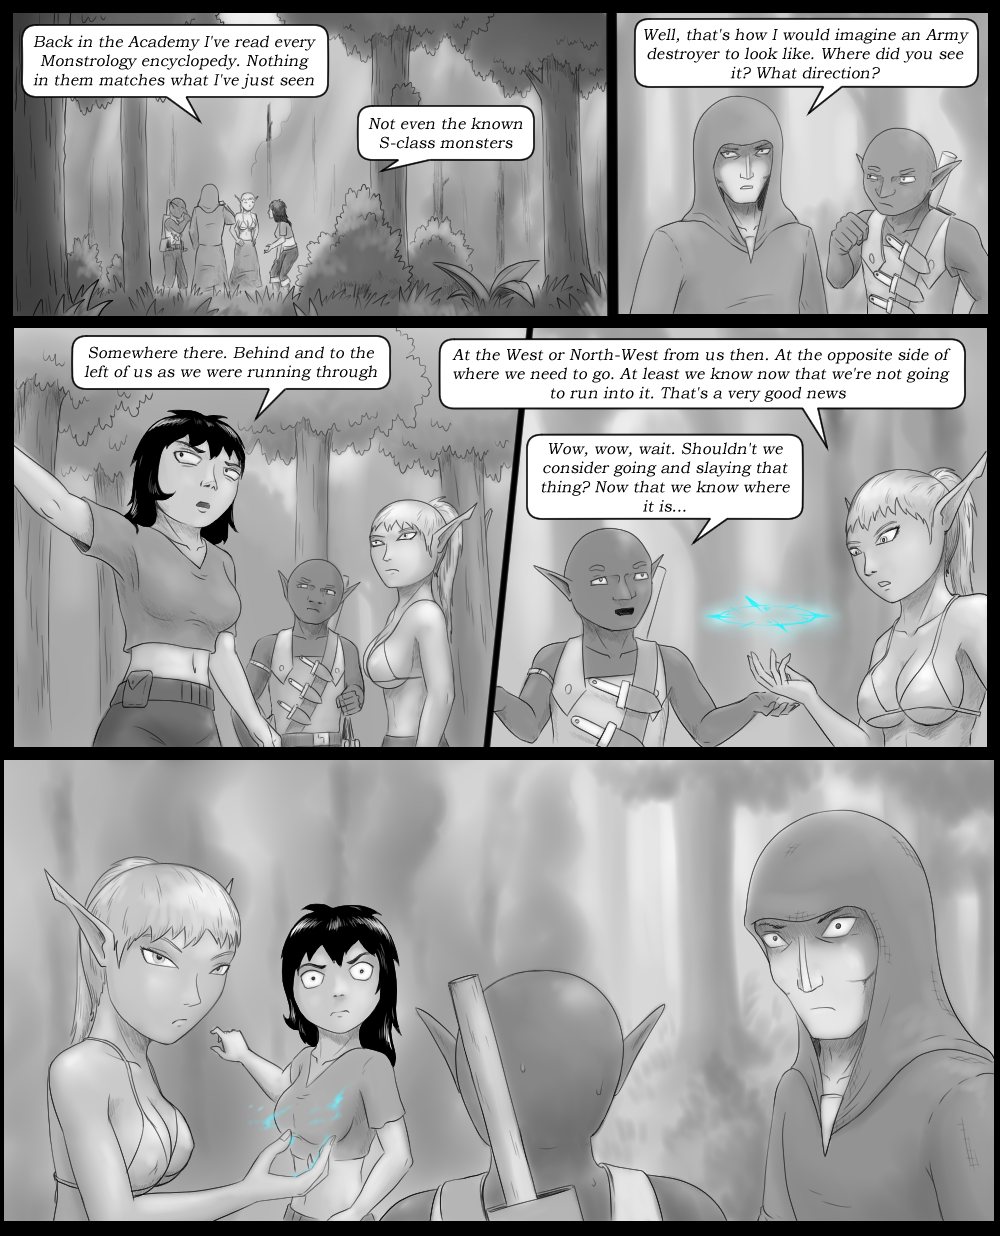 Page 8 - Option Nobody Else Considers